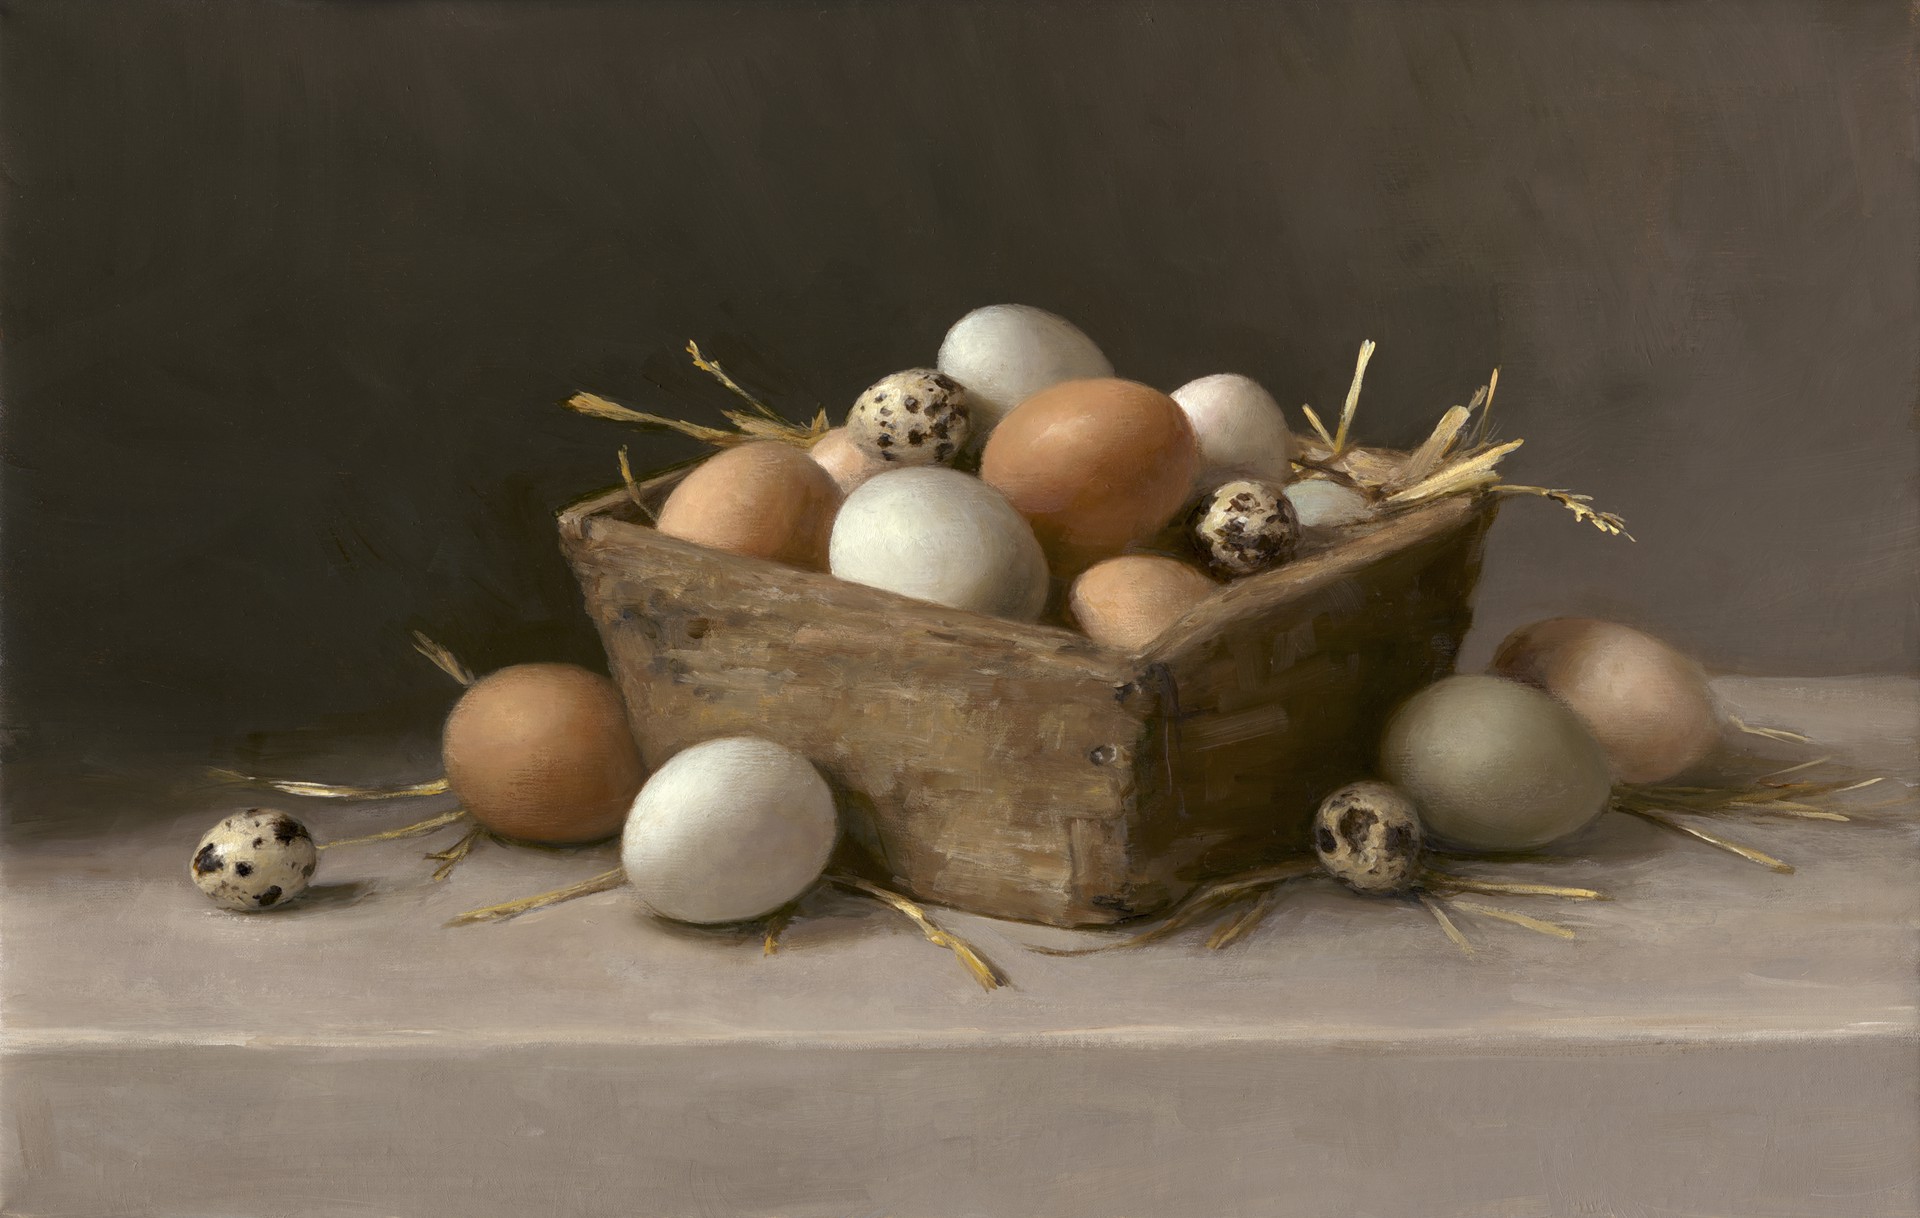 Eggs in a Wooden Bowl by Sarah Lamb